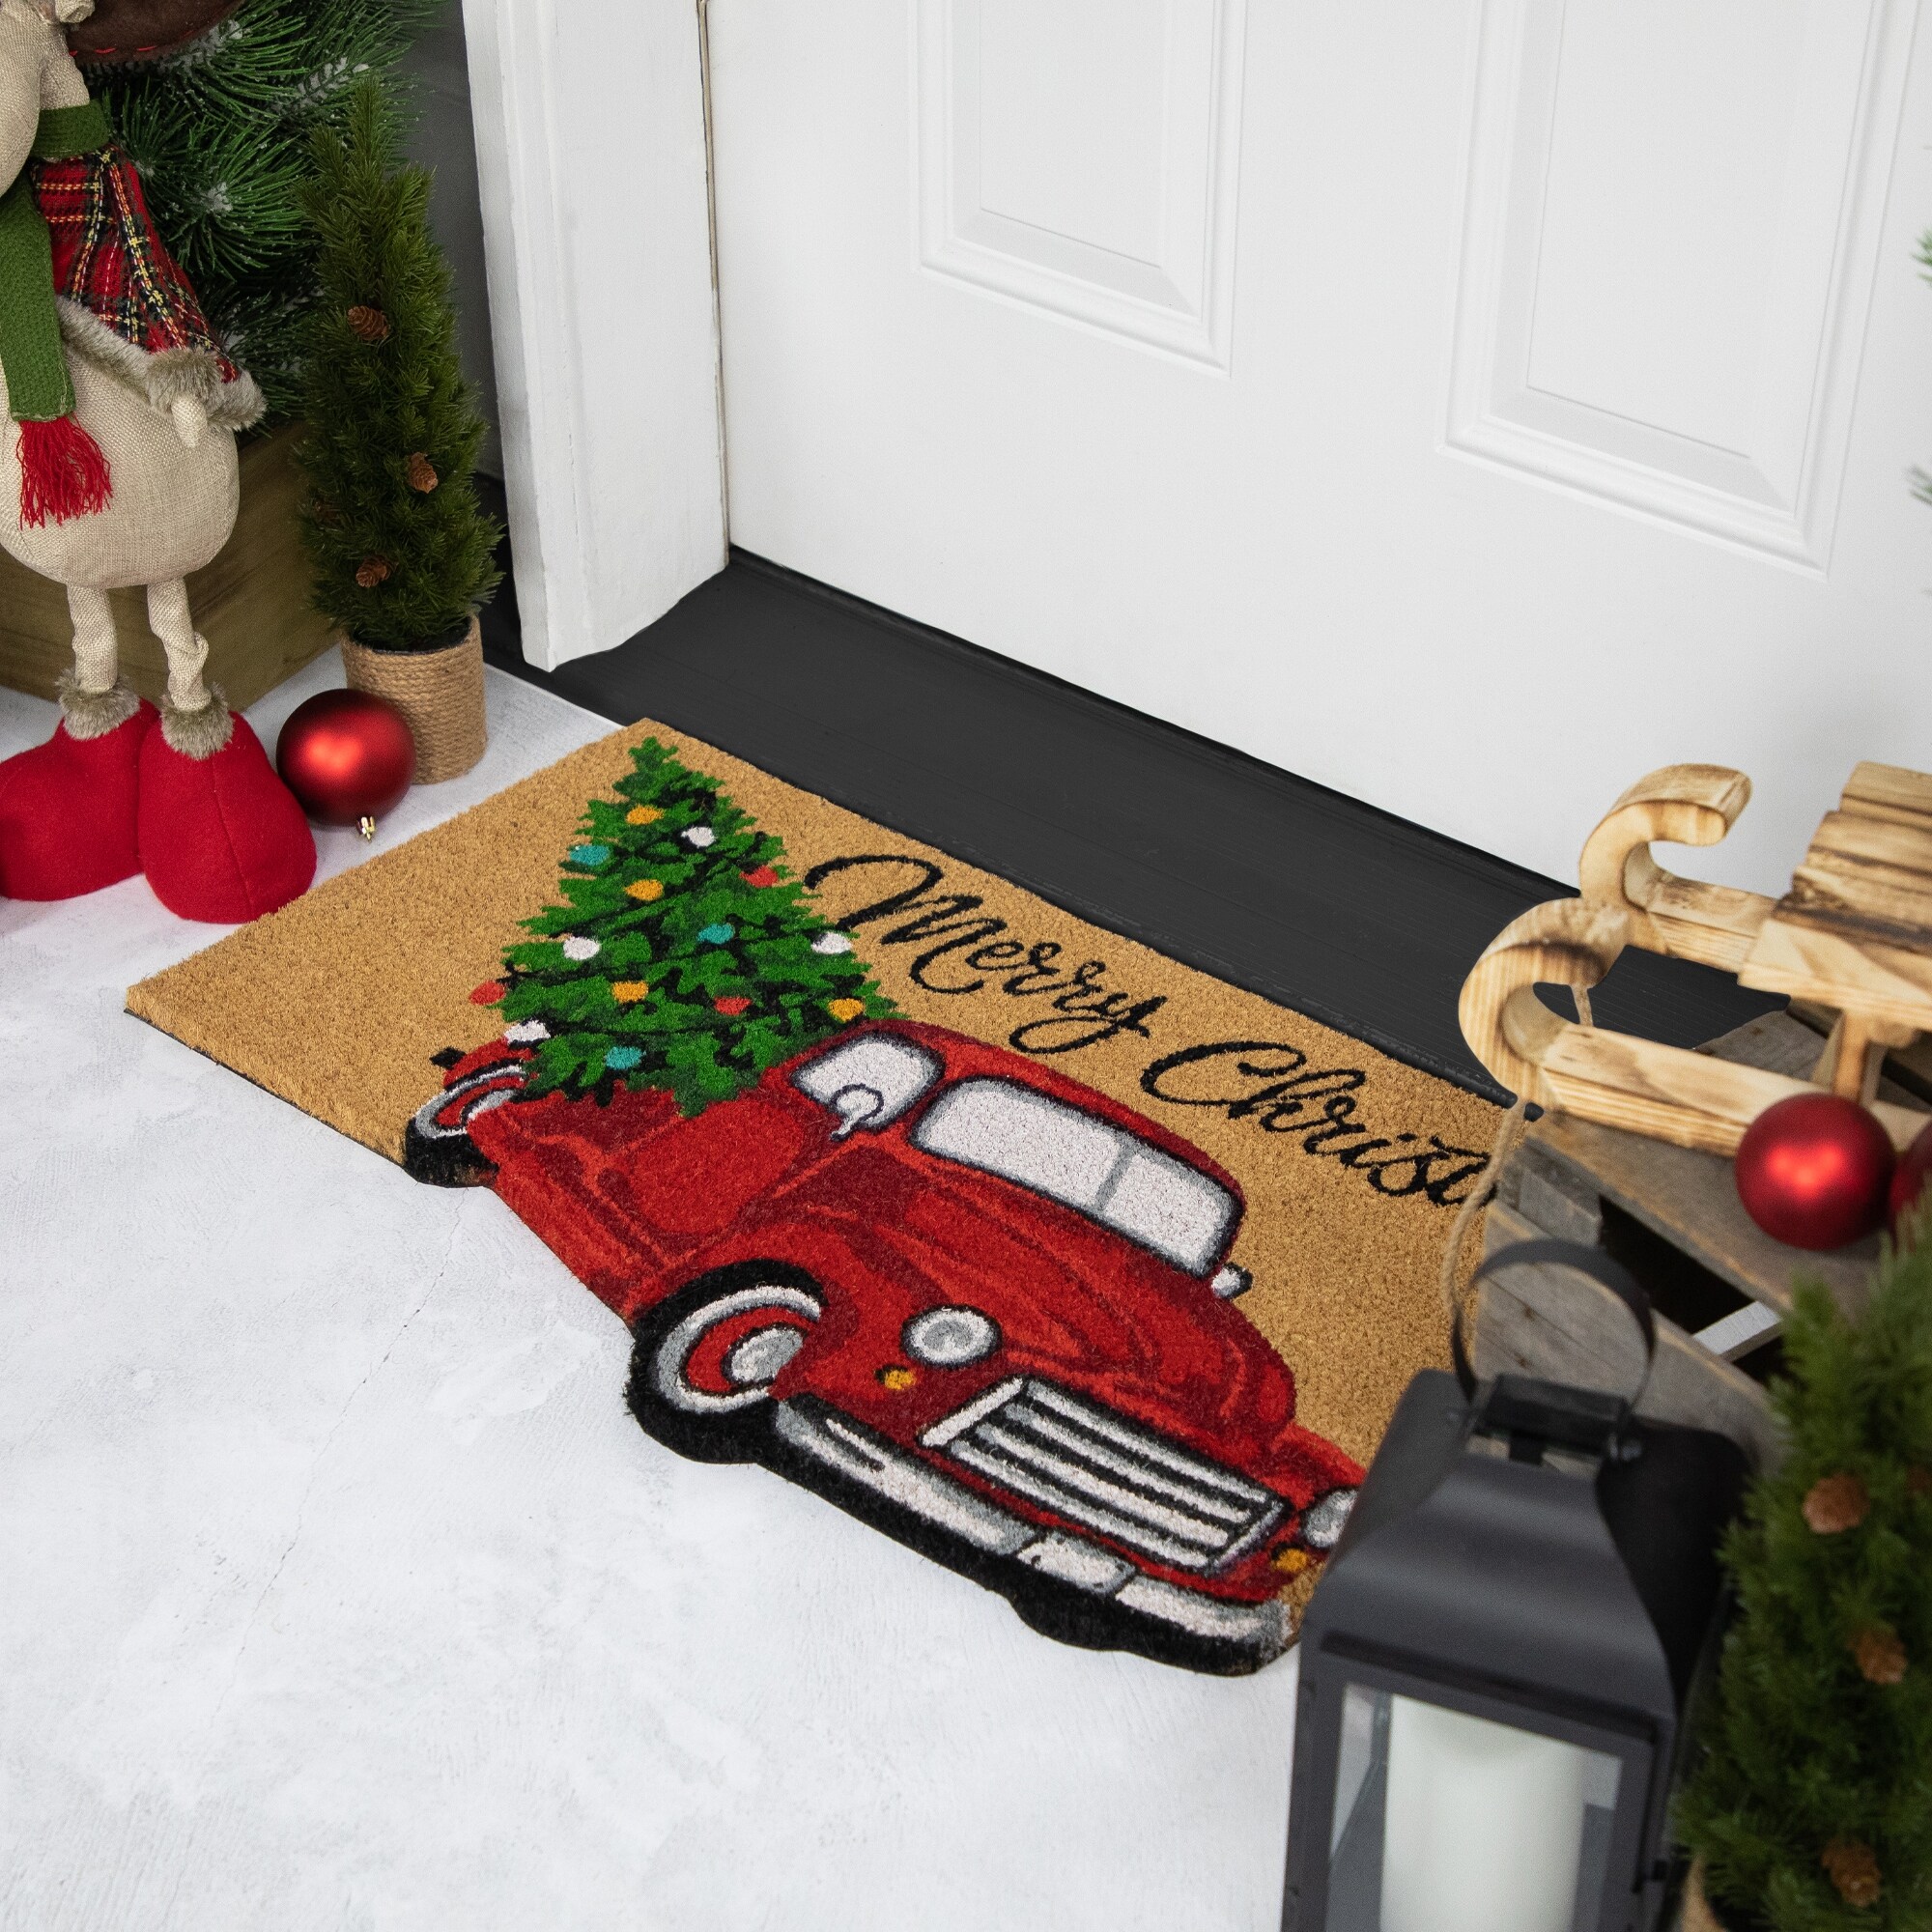 https://ak1.ostkcdn.com/images/products/is/images/direct/862fb93b4291ab5c06b483d3d5bb36b4286a85ac/Red-and-Green-Vintage-Truck-%22Merry-Christmas%22-Outdoor-Natural-Coir-Doormat-18%22-x-30%22.jpg